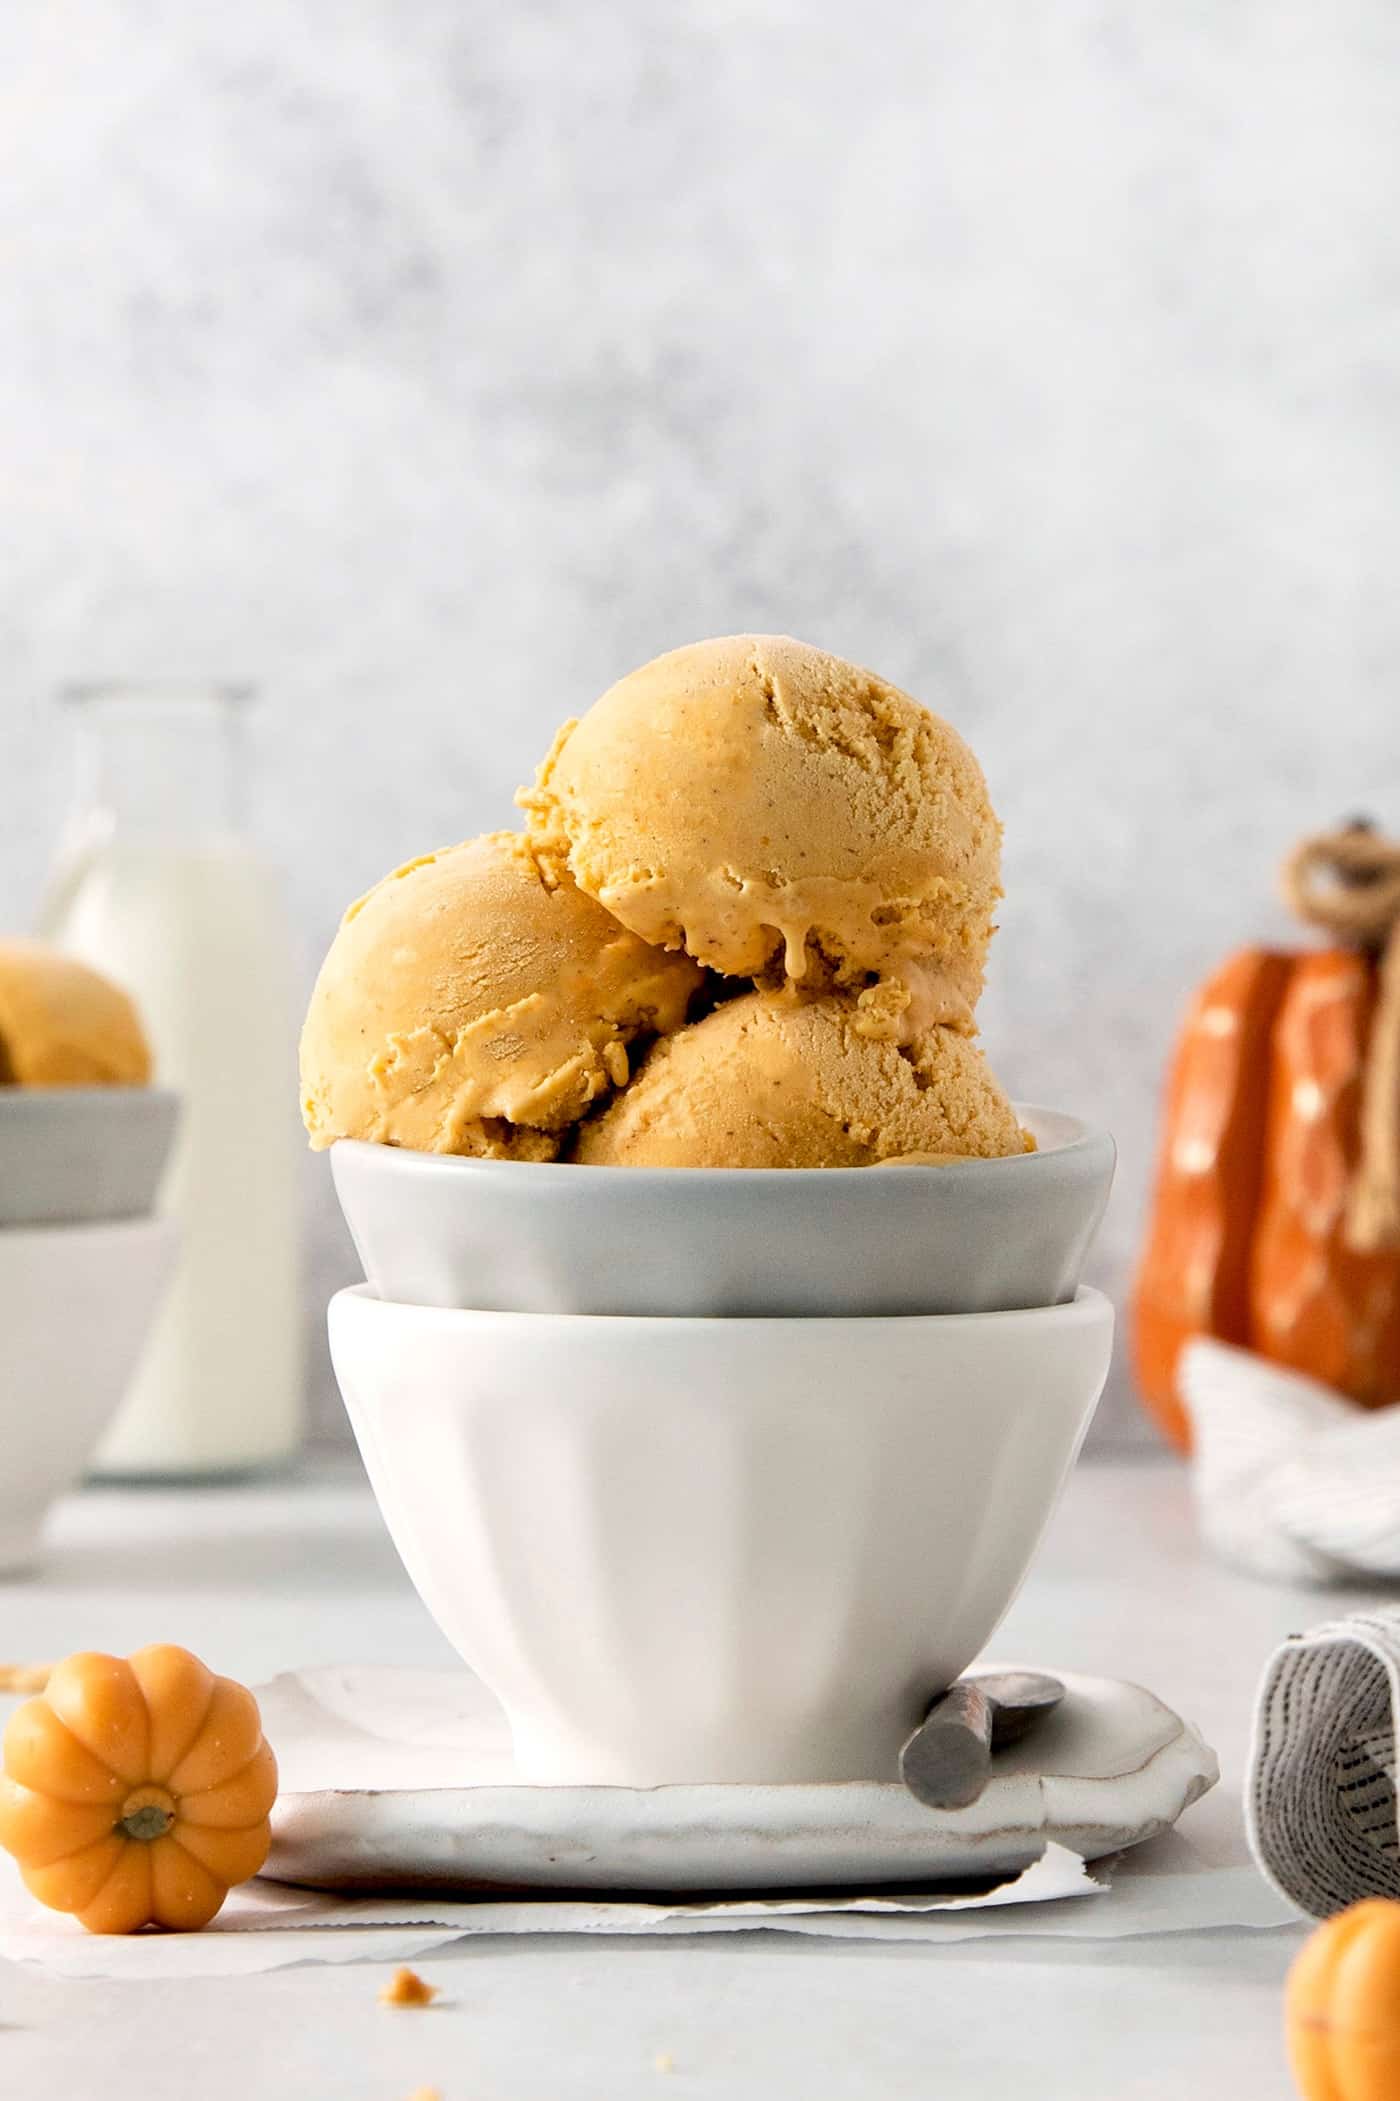 Three scoops of orange pumpkin ice cream are shown in a gray bowl stacked in a white bowl.